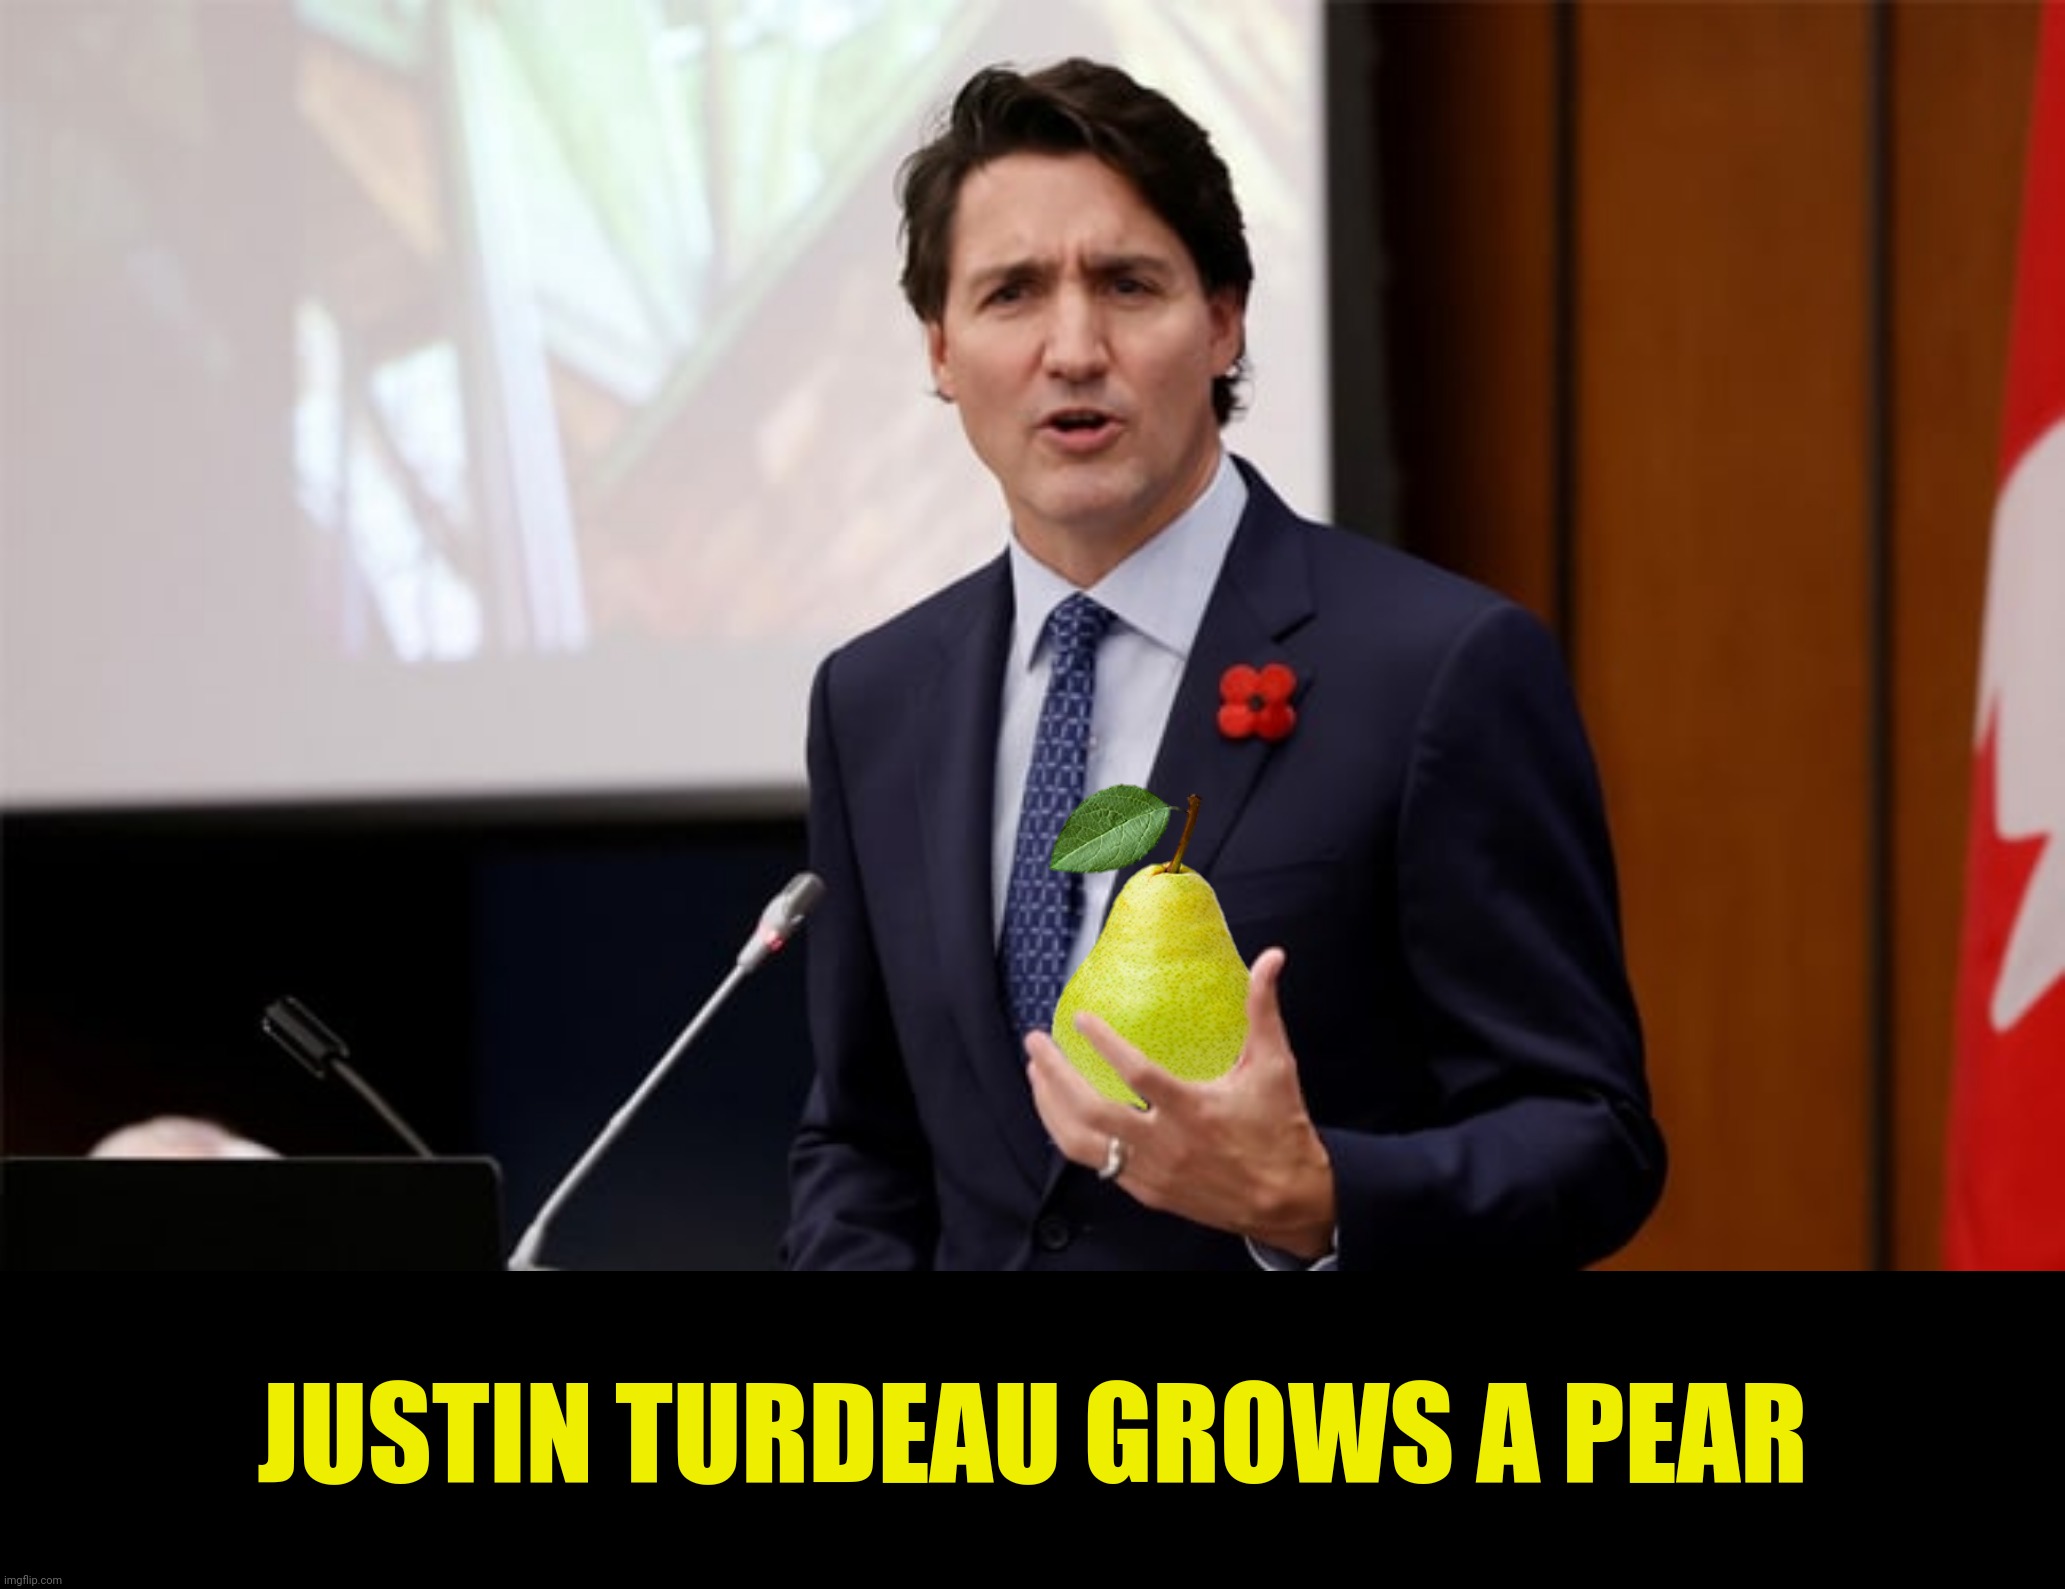 JUSTIN TURDEAU GROWS A PEAR | made w/ Imgflip meme maker